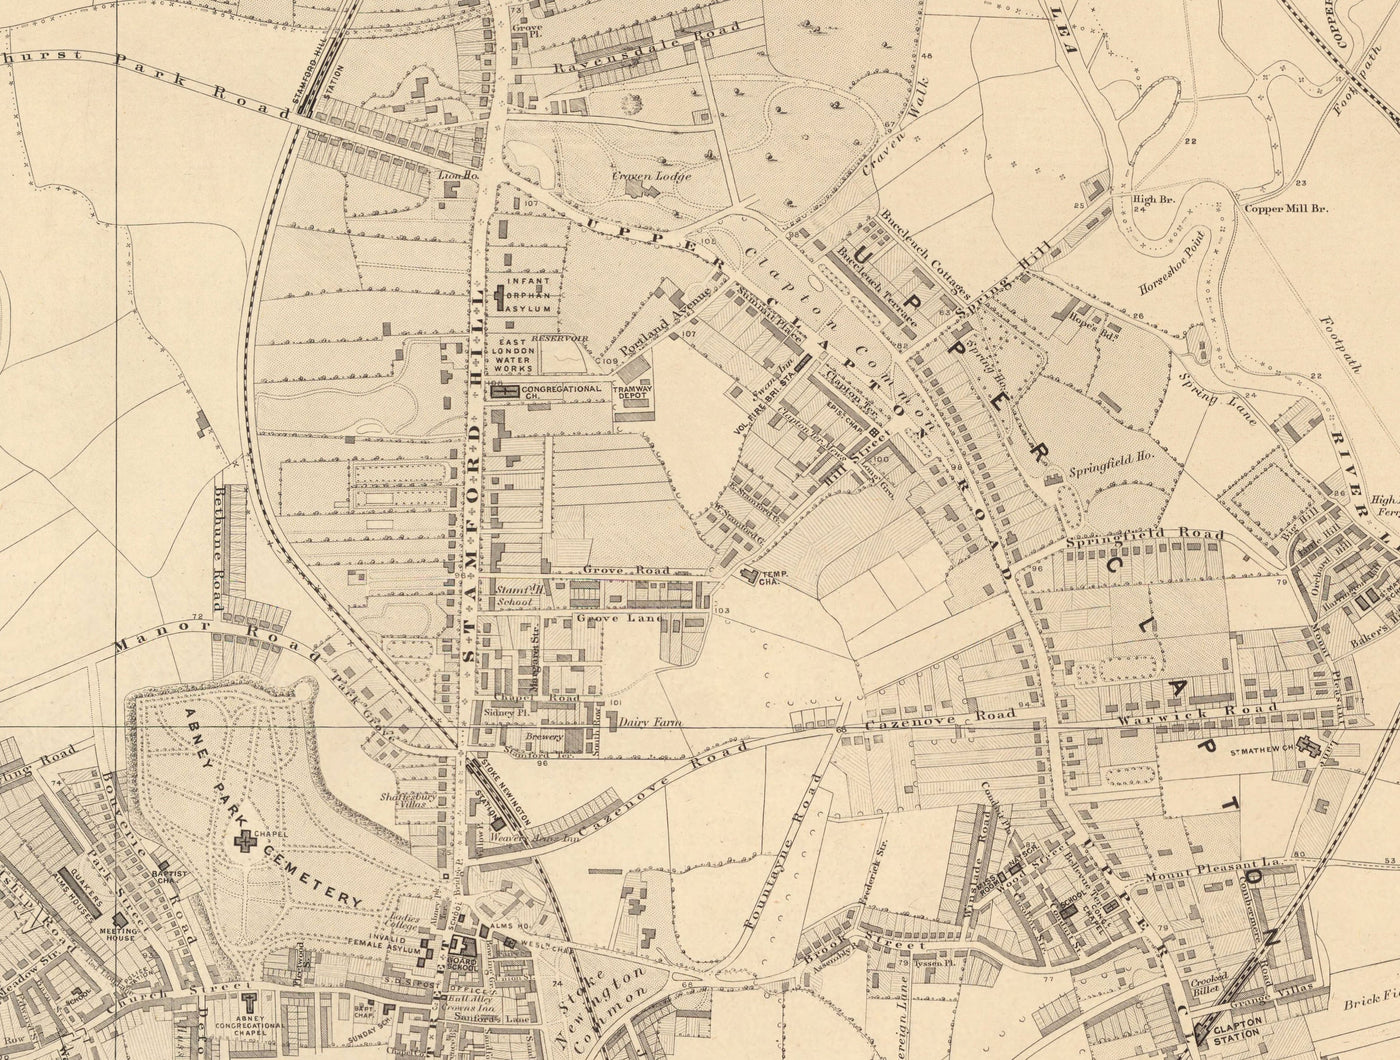 Old Map of North London, 1862 by Edward Stanford - Finsbury Park, Hackney Downs, Stoke Newington, Clapton - N4, N5, N15, N16, E5